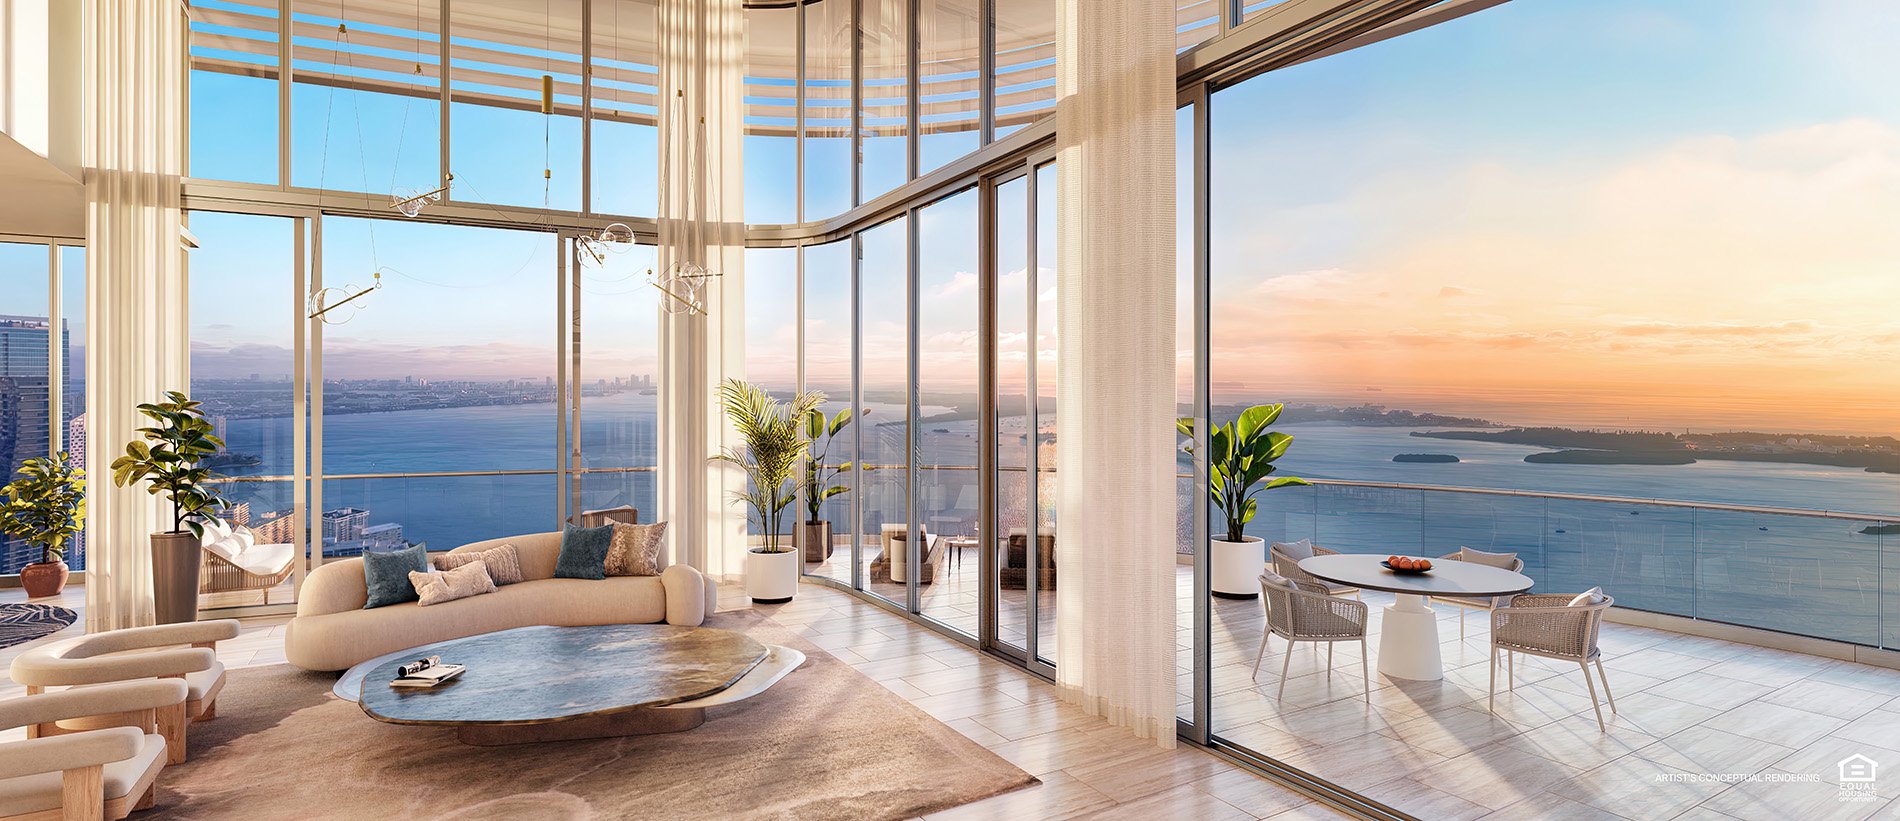 MIAMI – St Regis Brickell Residences , full floor with 5 bedrooms for sale